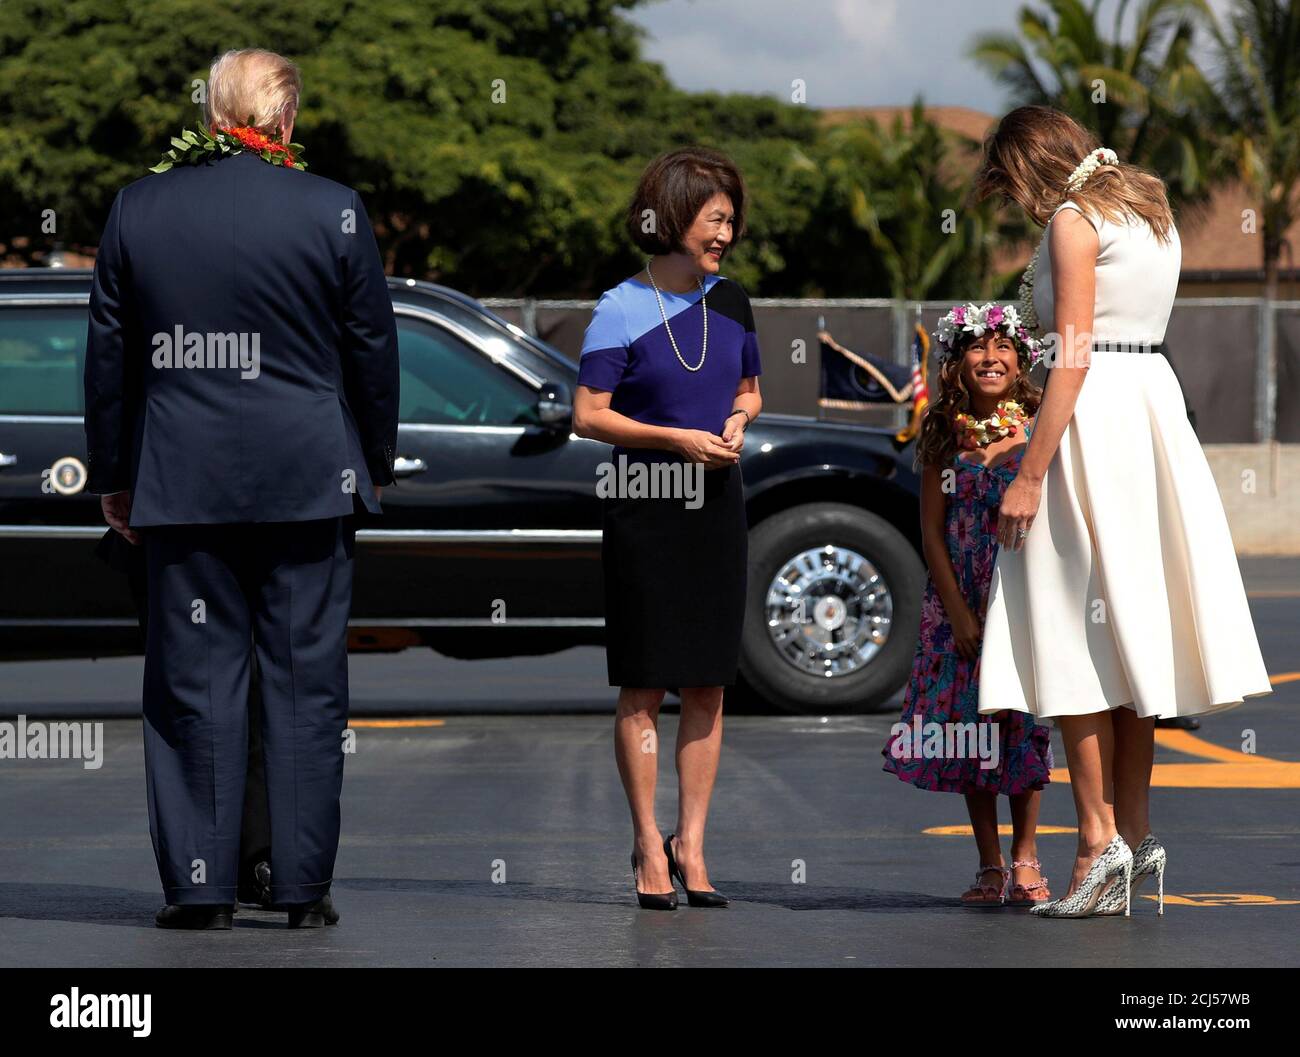 Dawn Ige (C), the wife of the governor Hawaii, looks on as Mikayla Webb  (2nd R) presents flower leis to U.S. President Donald Trump and first lady  Melania Trump as they arrive